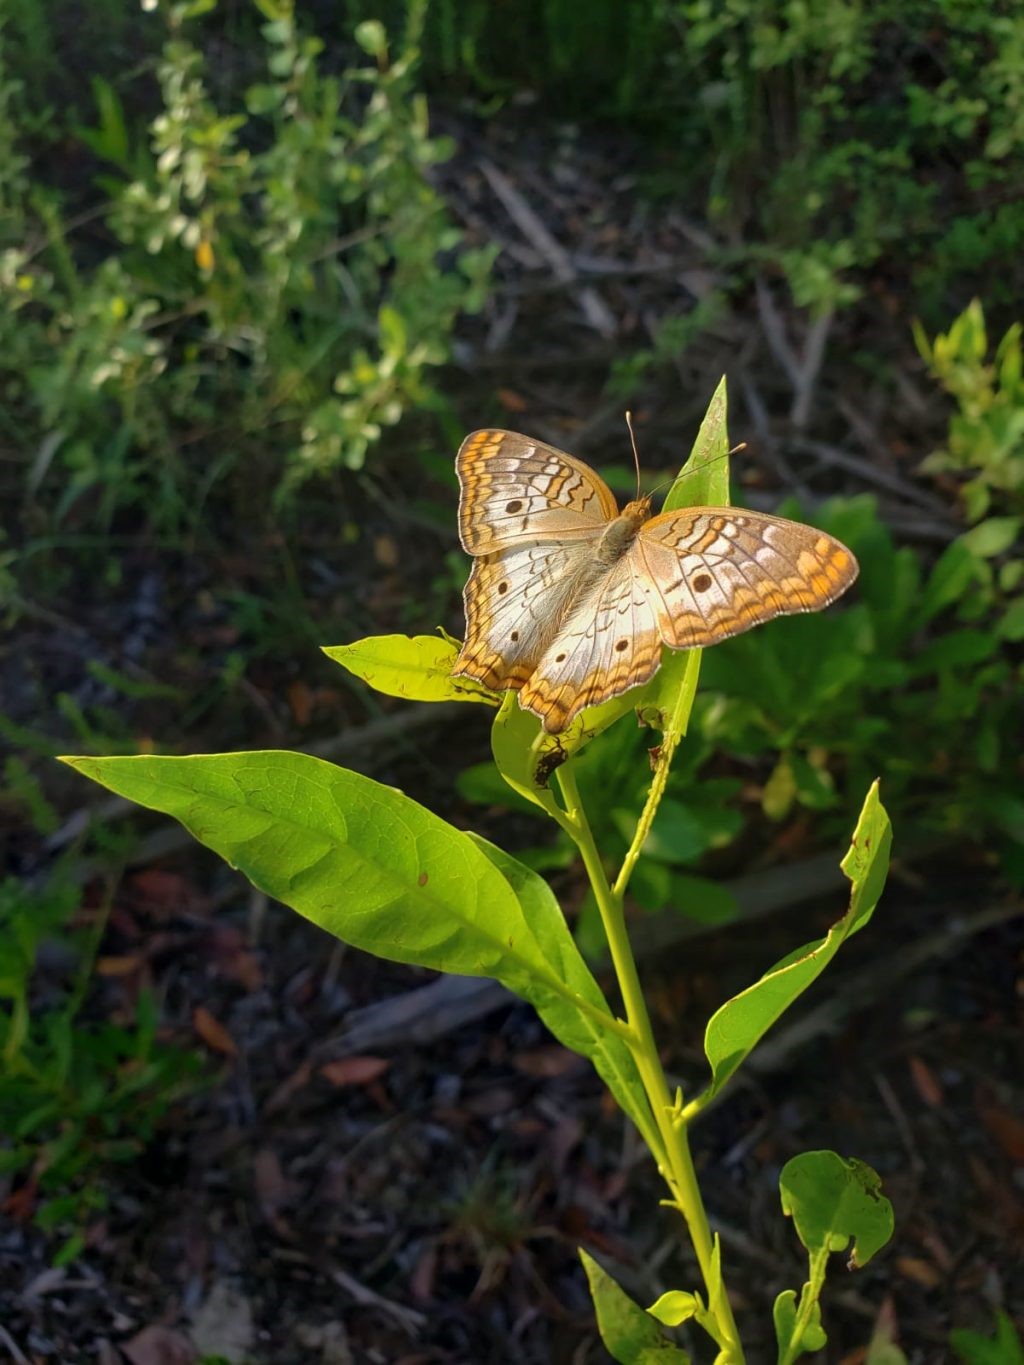 white-peaock-butterfly-with-brown-spots-resting-on-plant